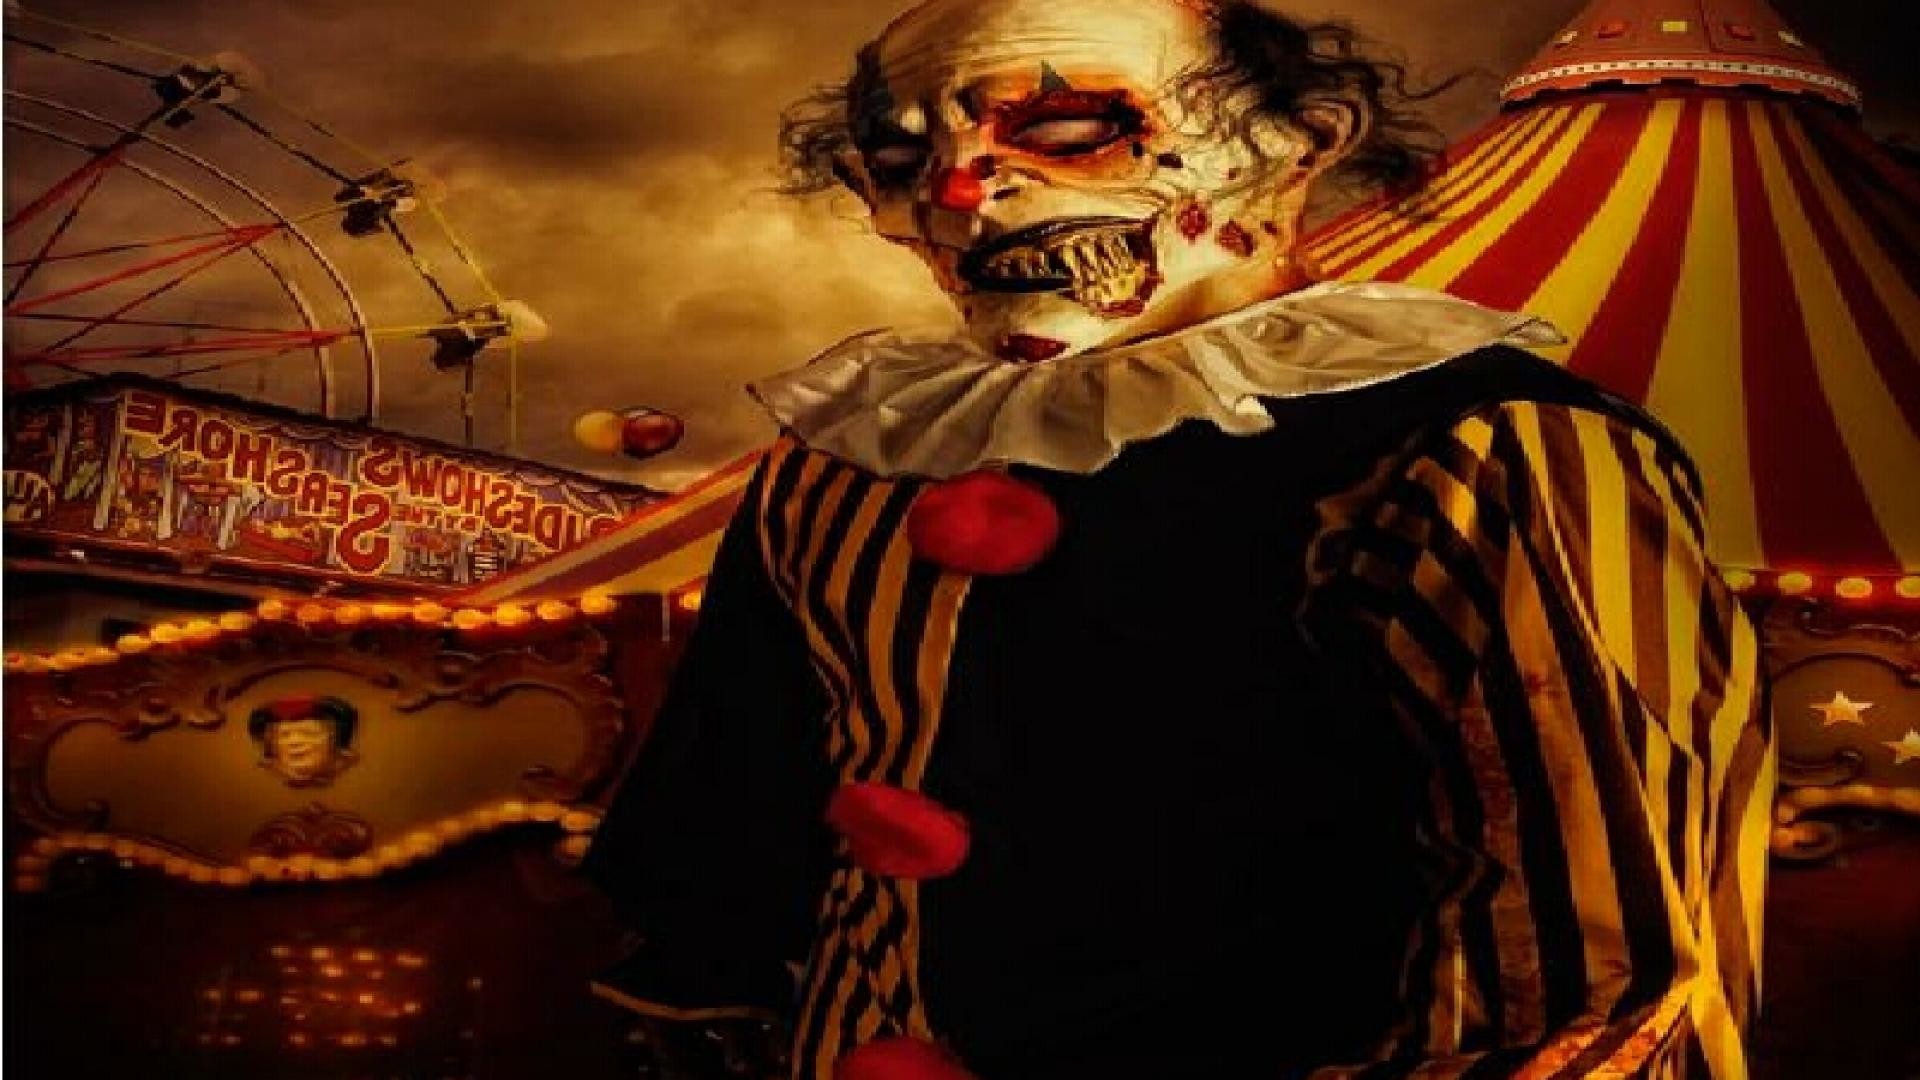 1920x1080 ... Killer Clown Wallpapers (36 Wallpapers) – Adorable Wallpapers Scary ...